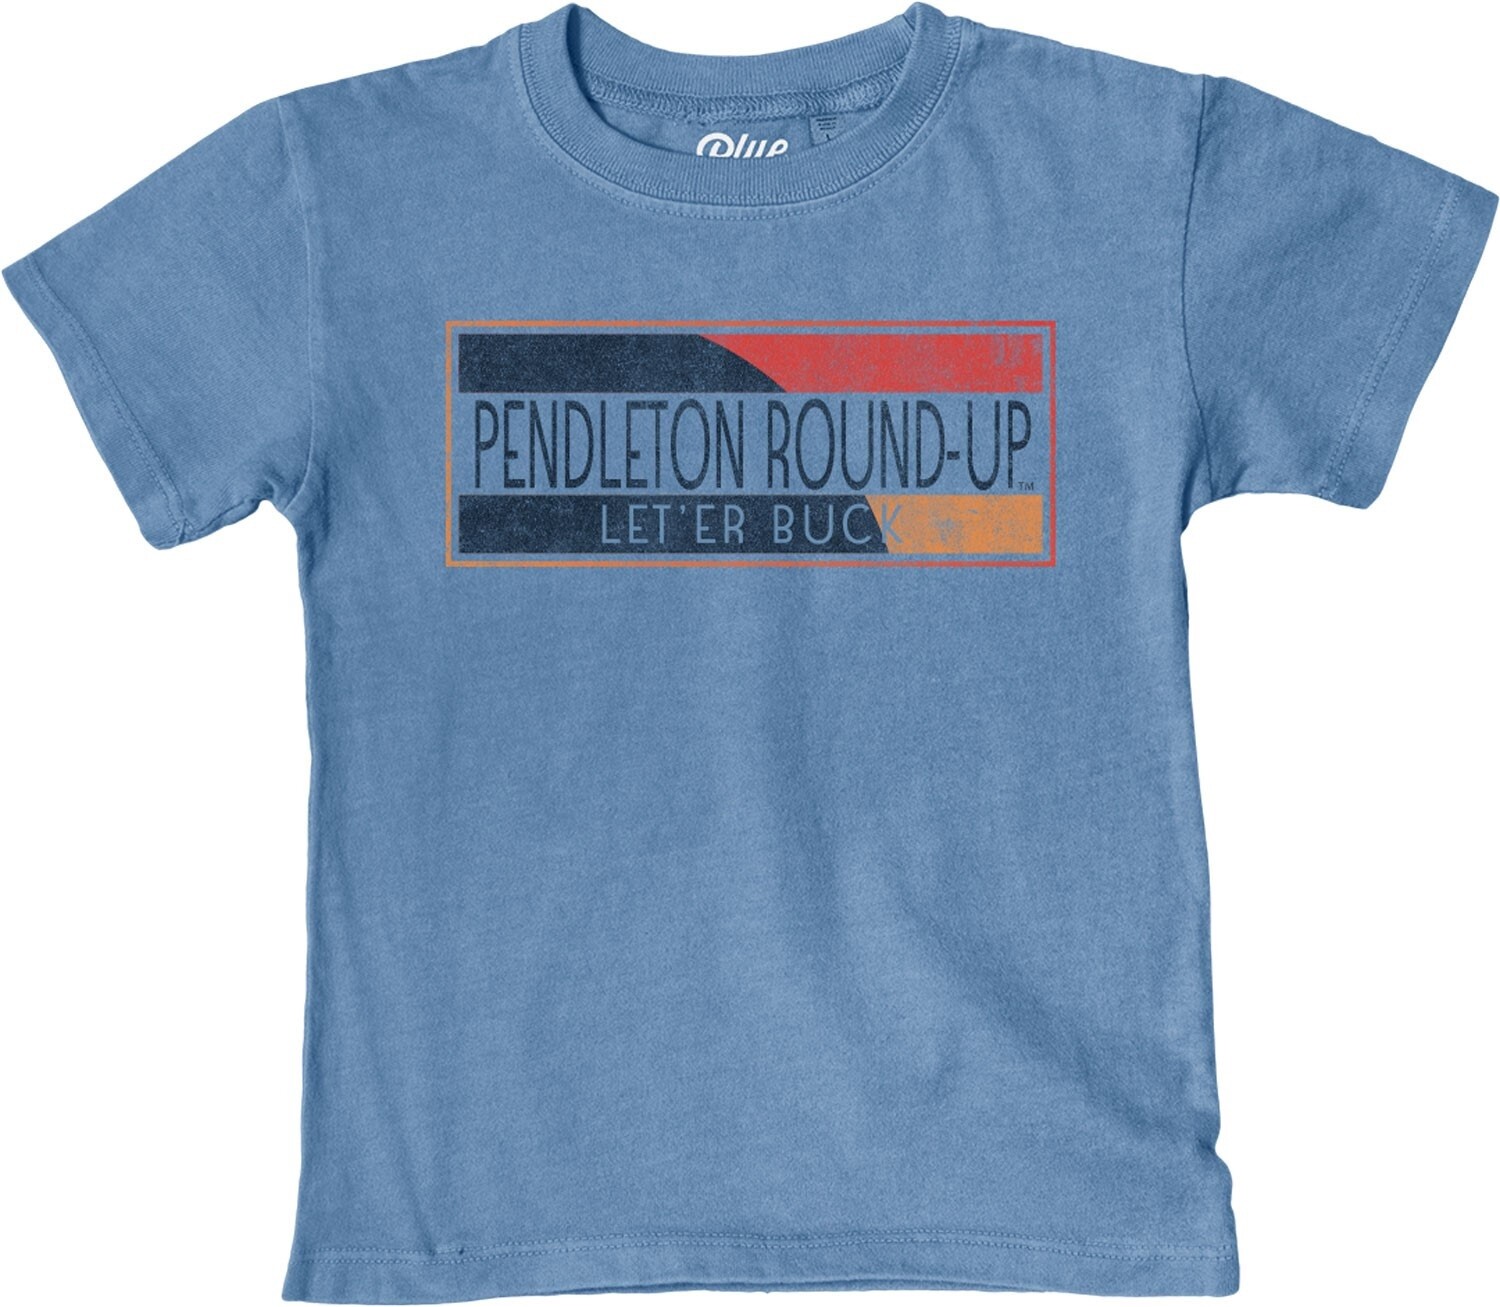 Toddler Pendleton Round-Up Guard Down Tee, 2T, 3T, 4T: 2T